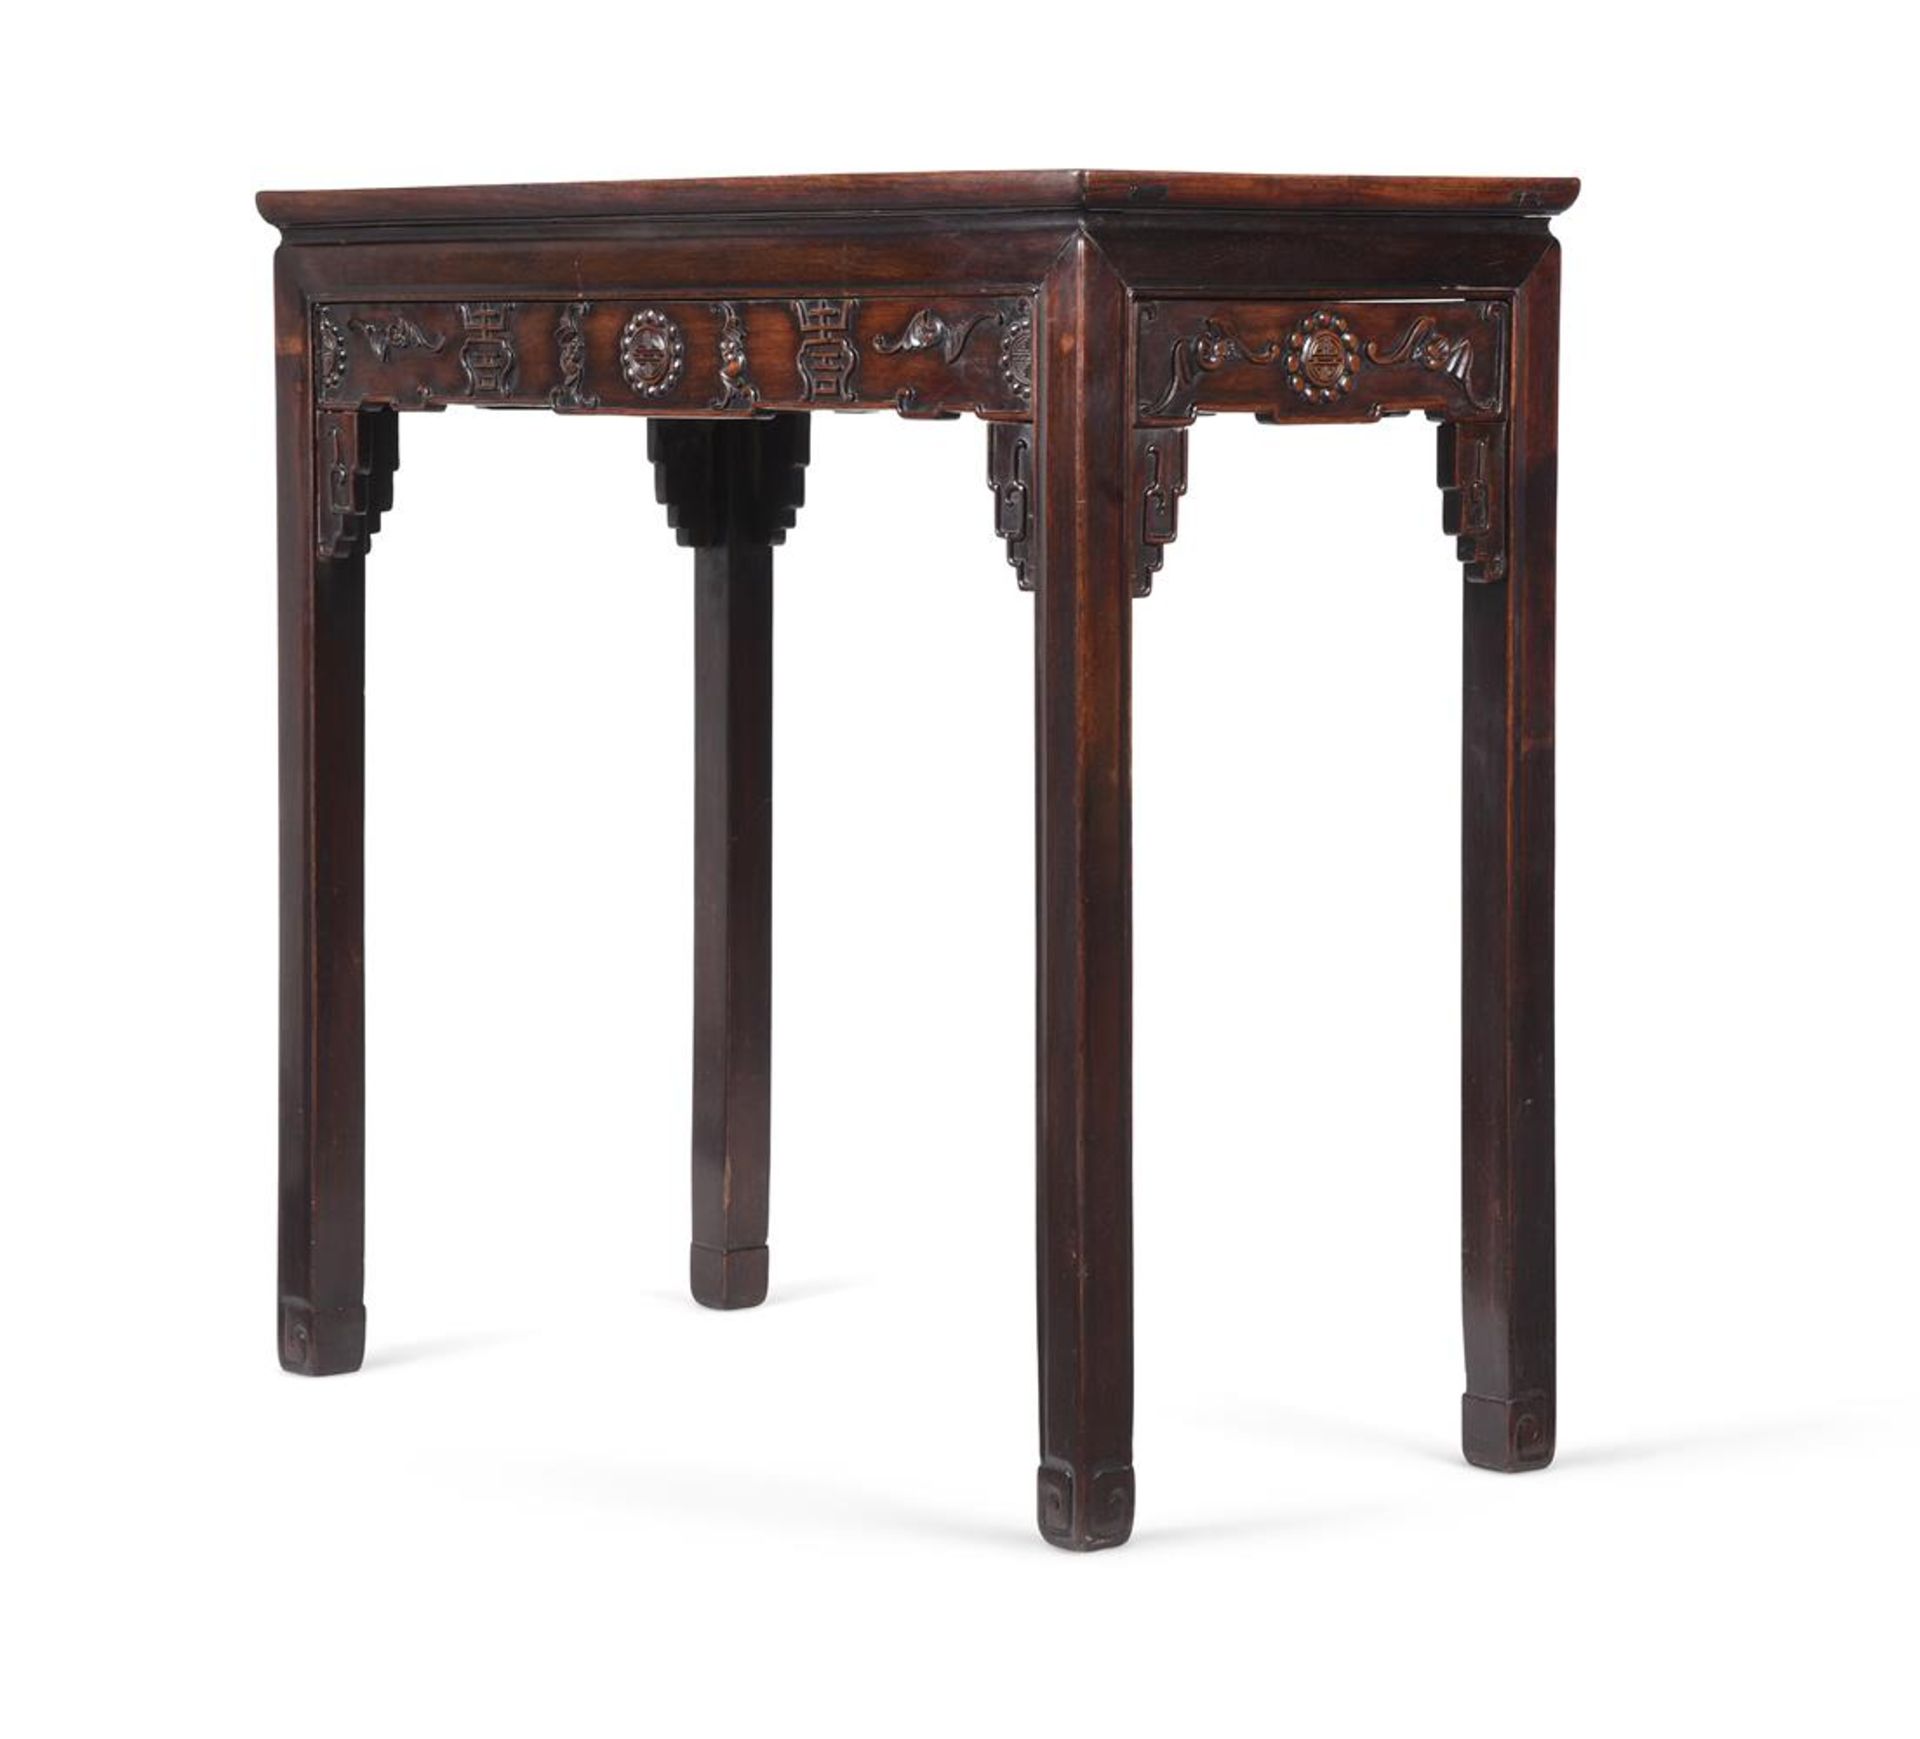 A CHINESE HARDWOOD SIDE OR ALTAR TABLE, 18TH/19TH CENTURY